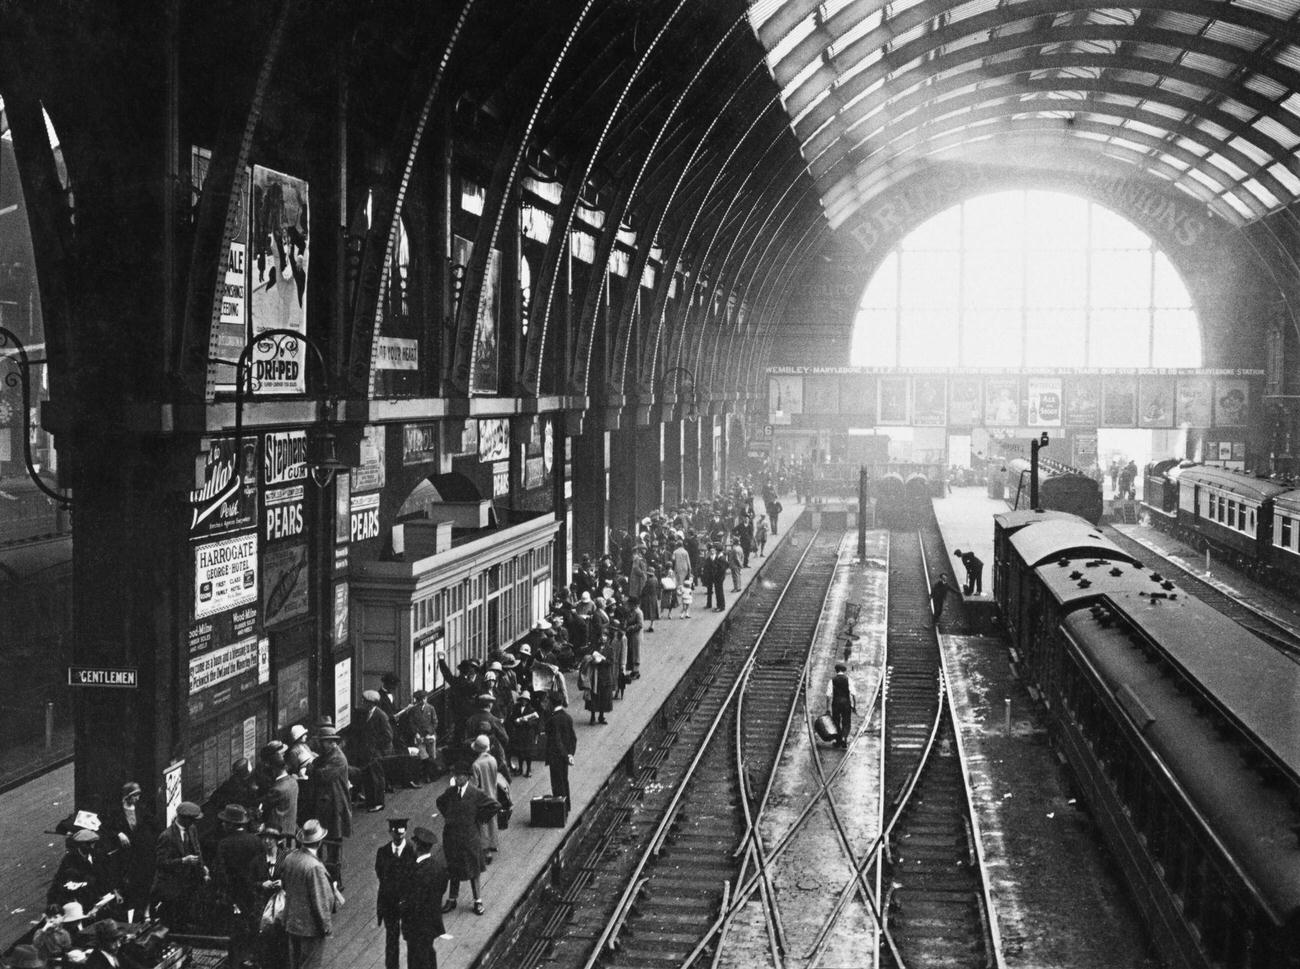 Holiday crowds at King's Cross railway station, London, August 1925.